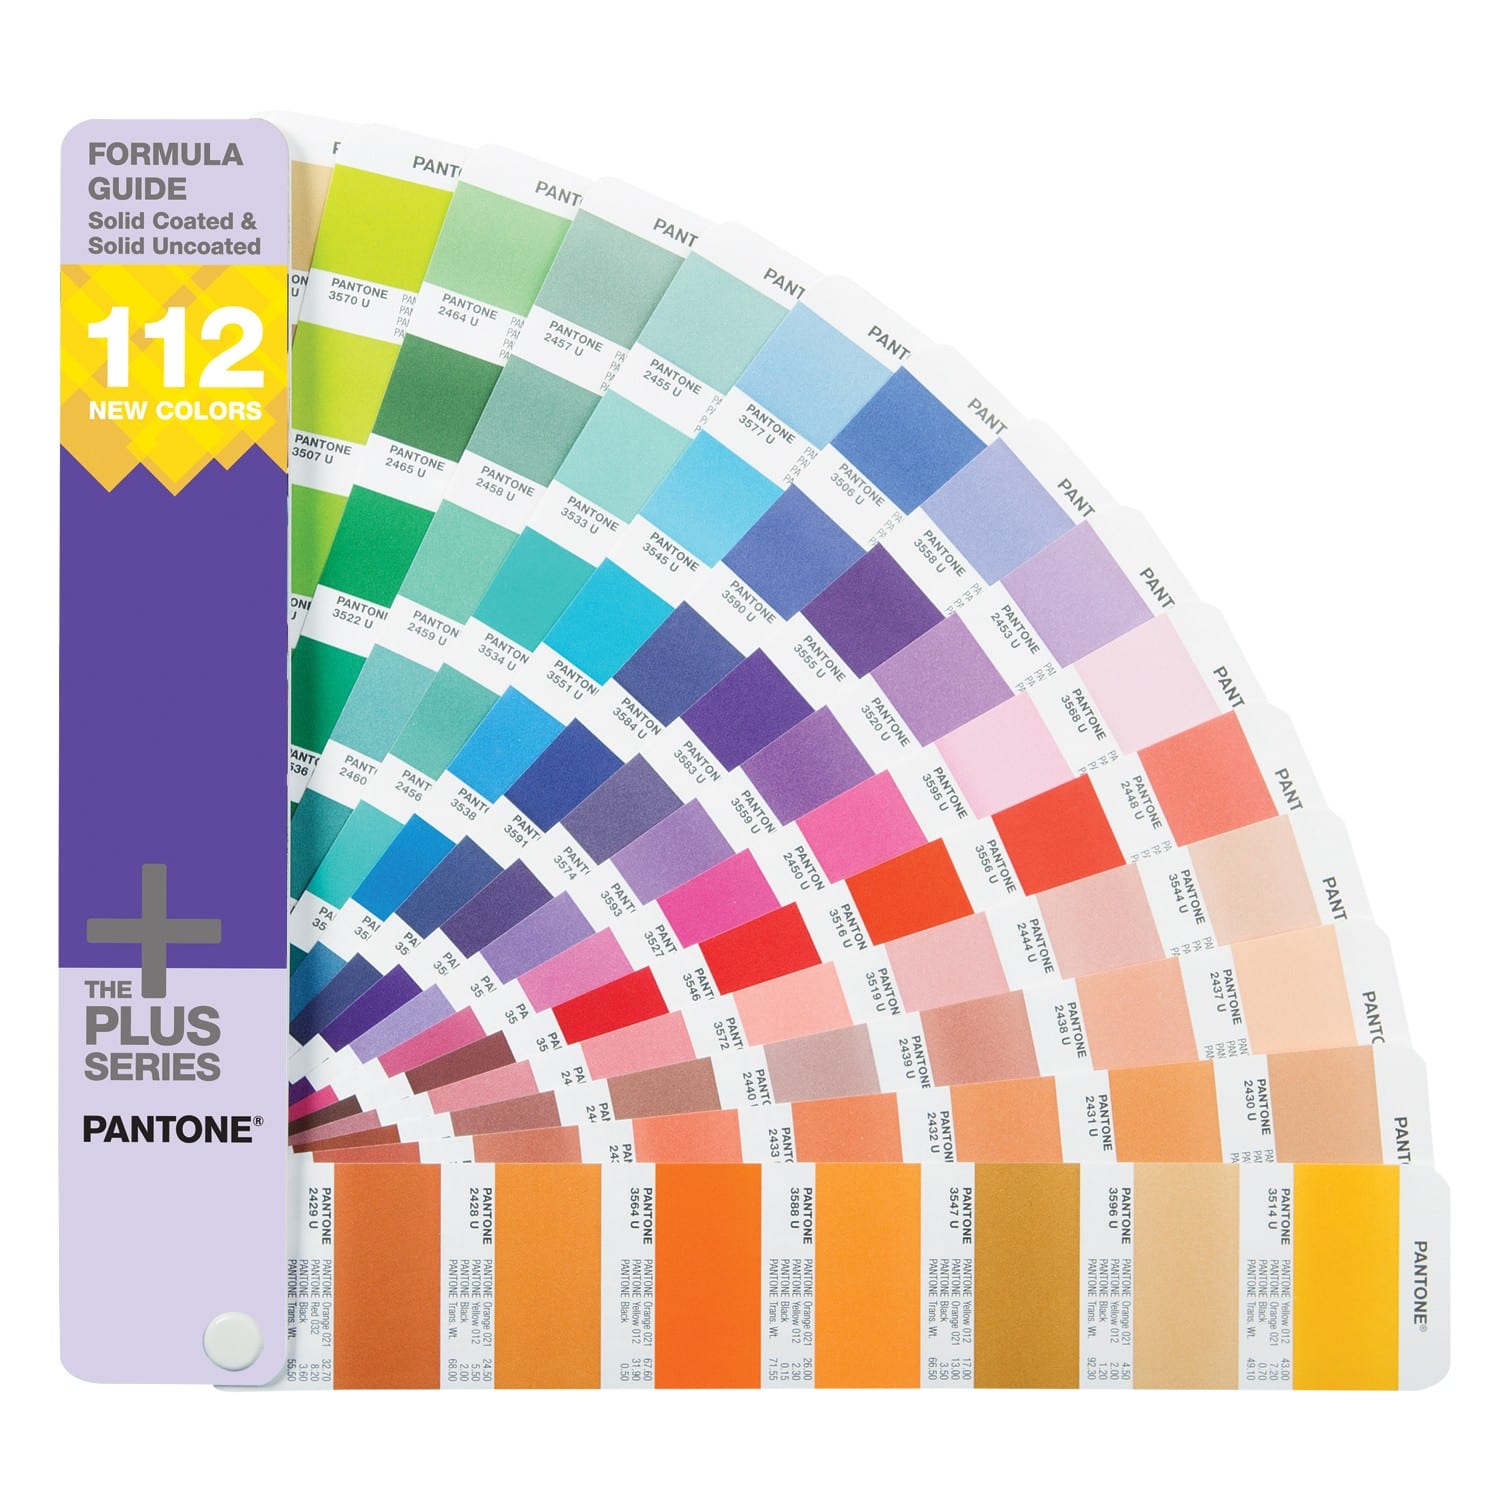 PANTONE expands with 112 new colour shades in the Plus Series 